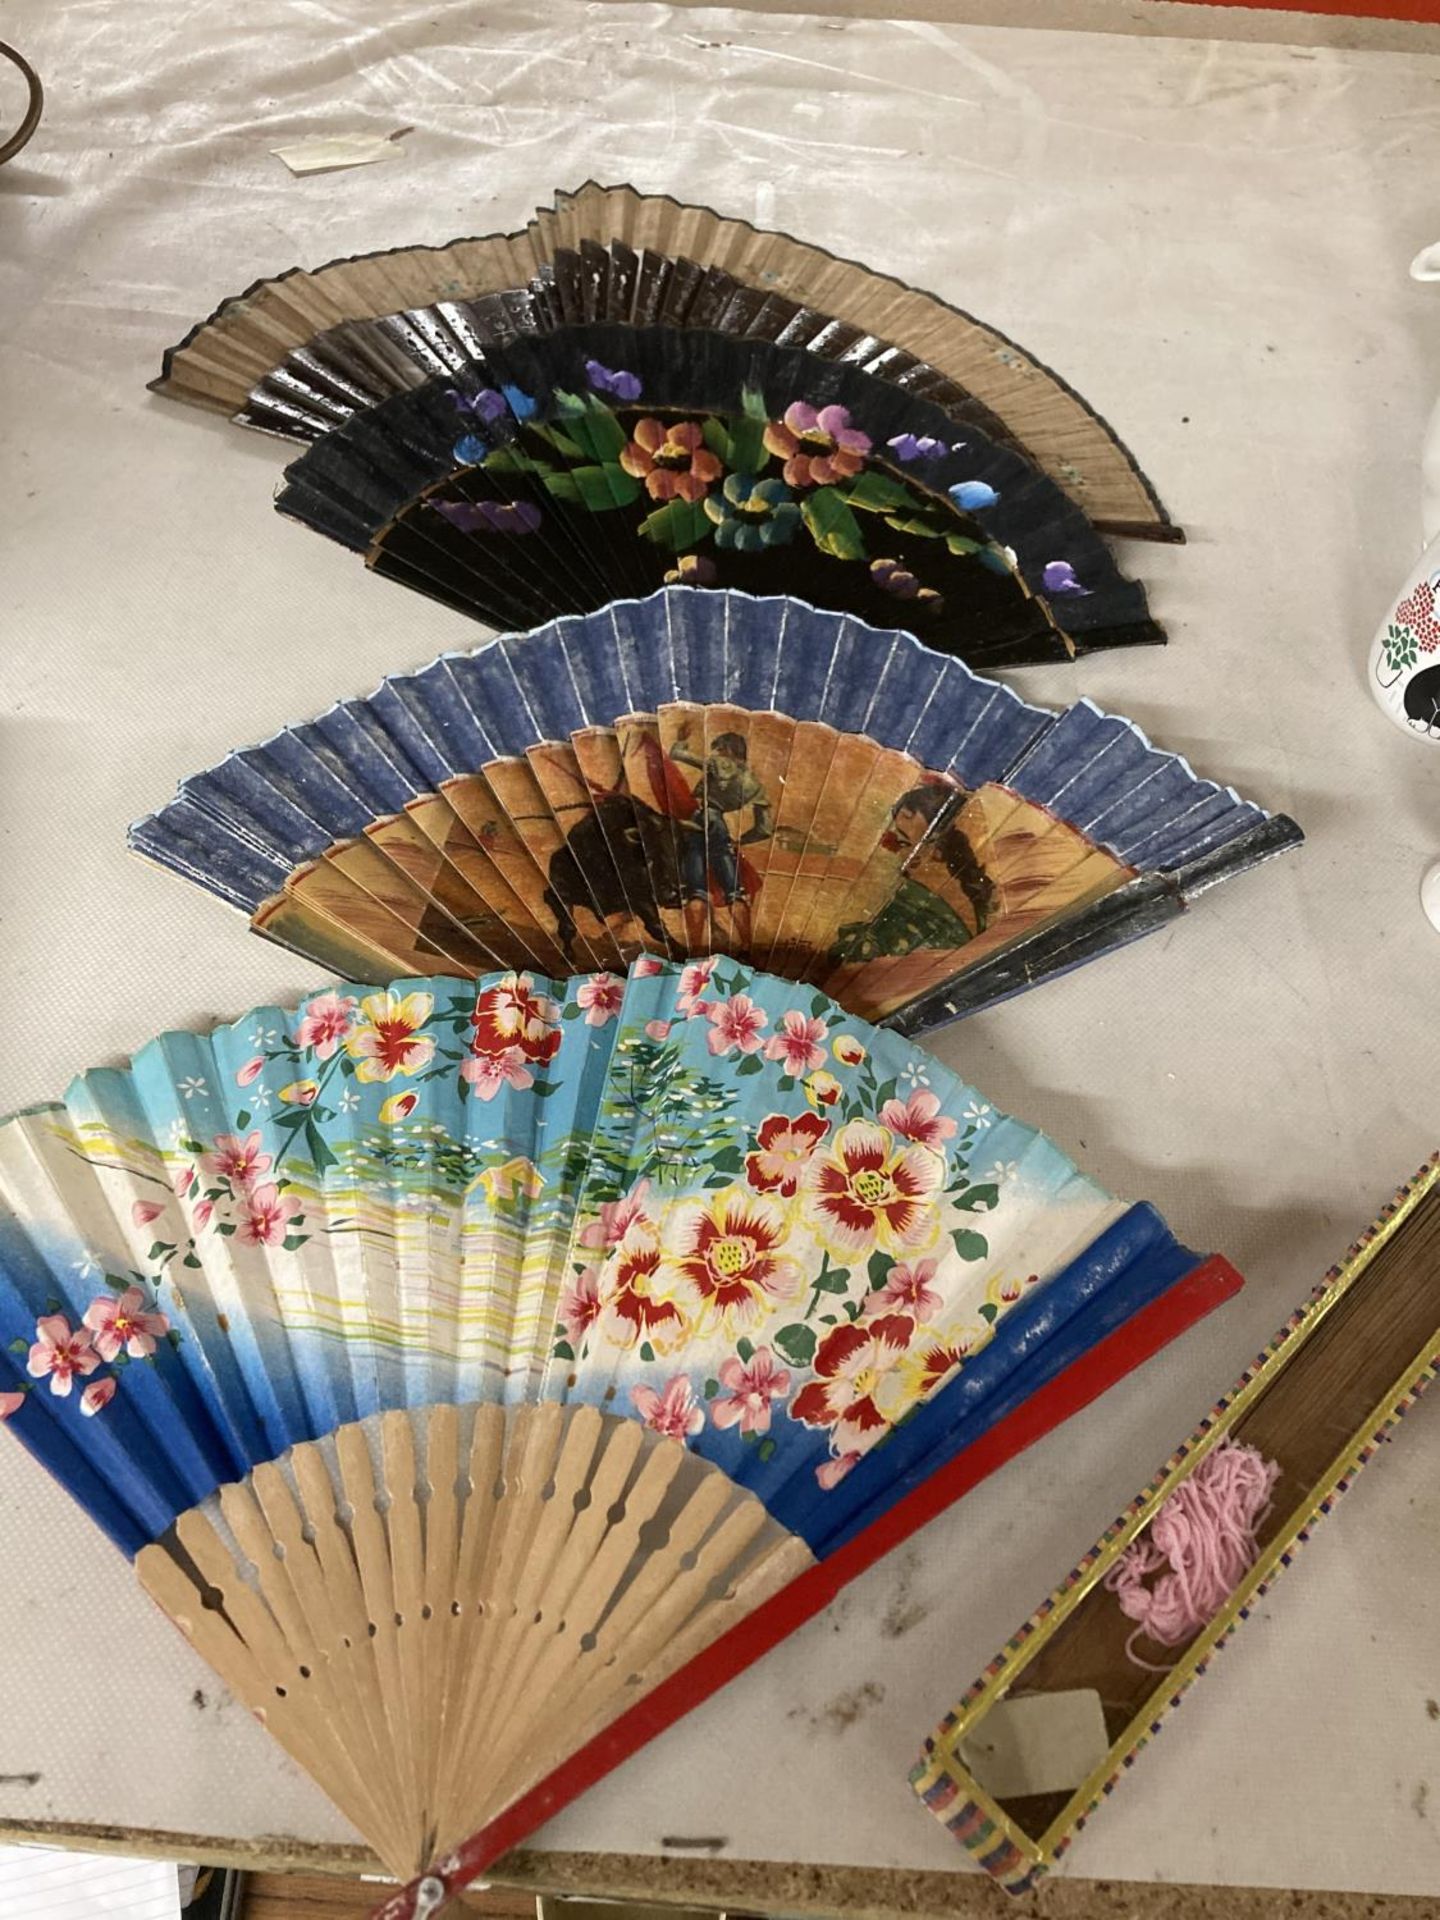 A COLLECTION OF VINTAGE FANS - 5 IN TOTAL